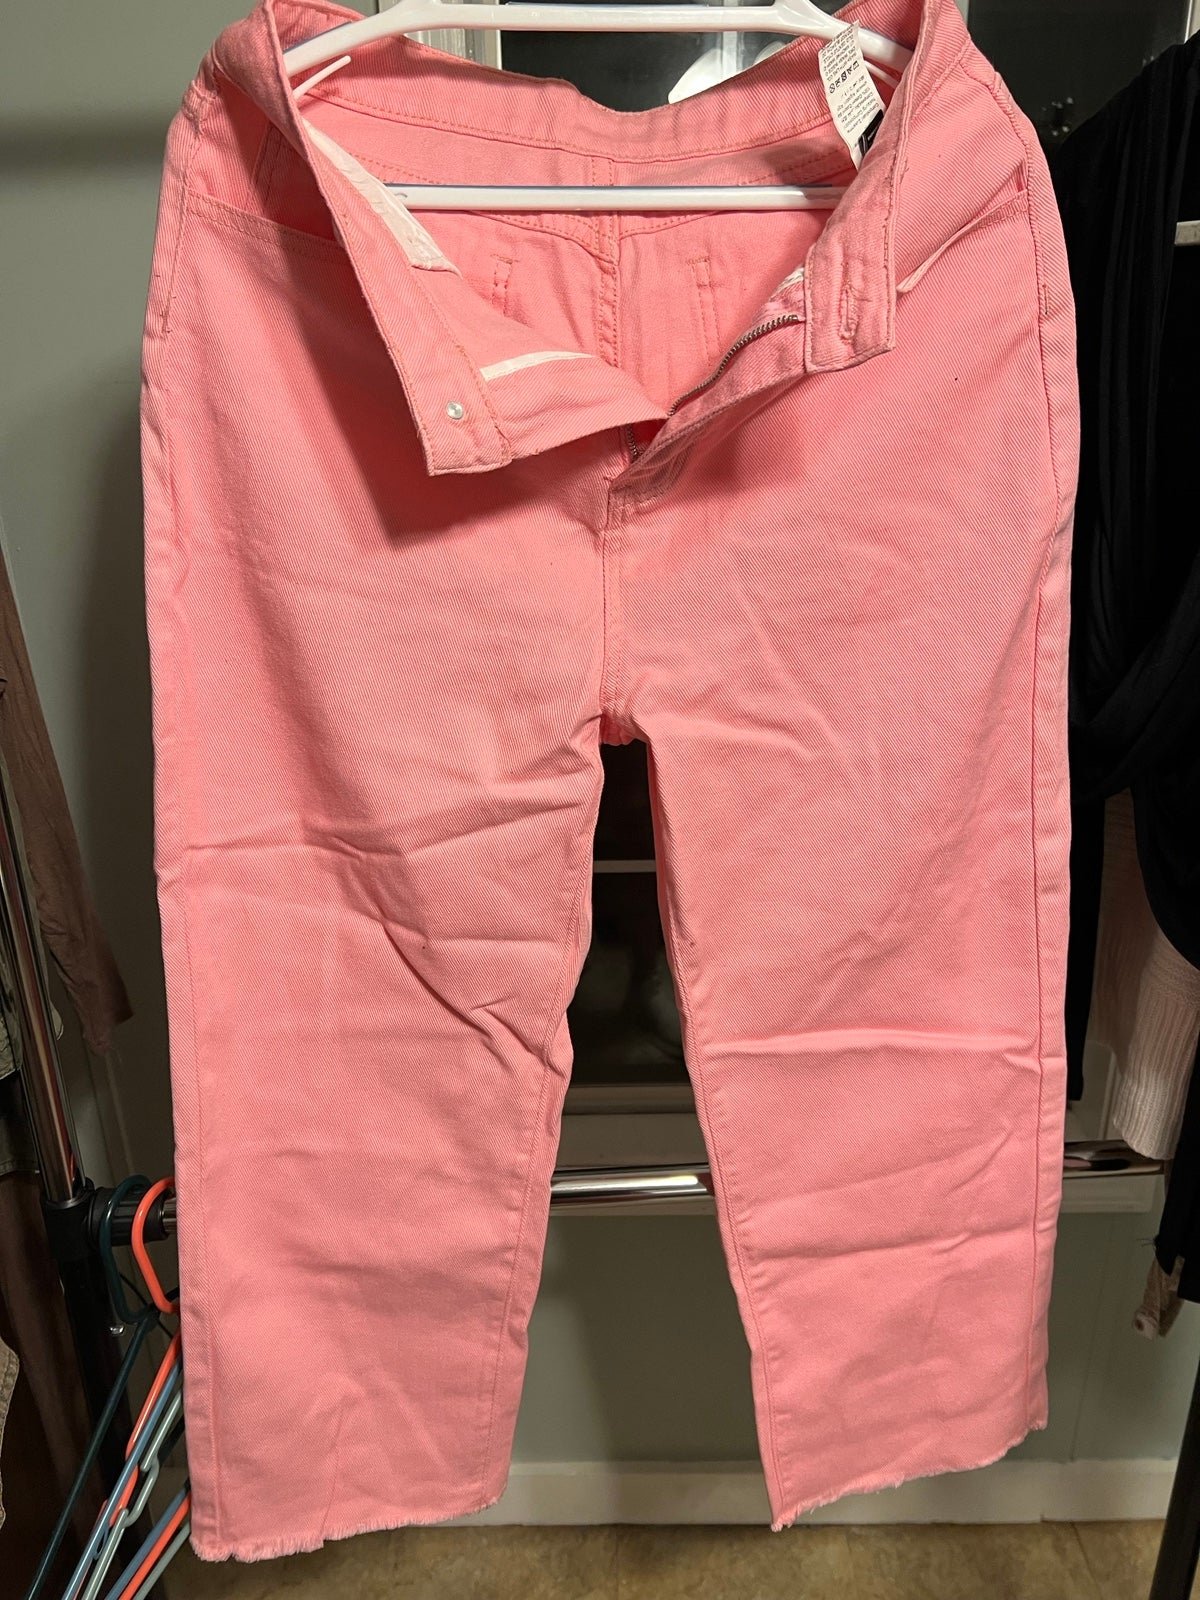 cheapest place to buy  SHEIN pink cropped jeans HGe92lvd7 for sale